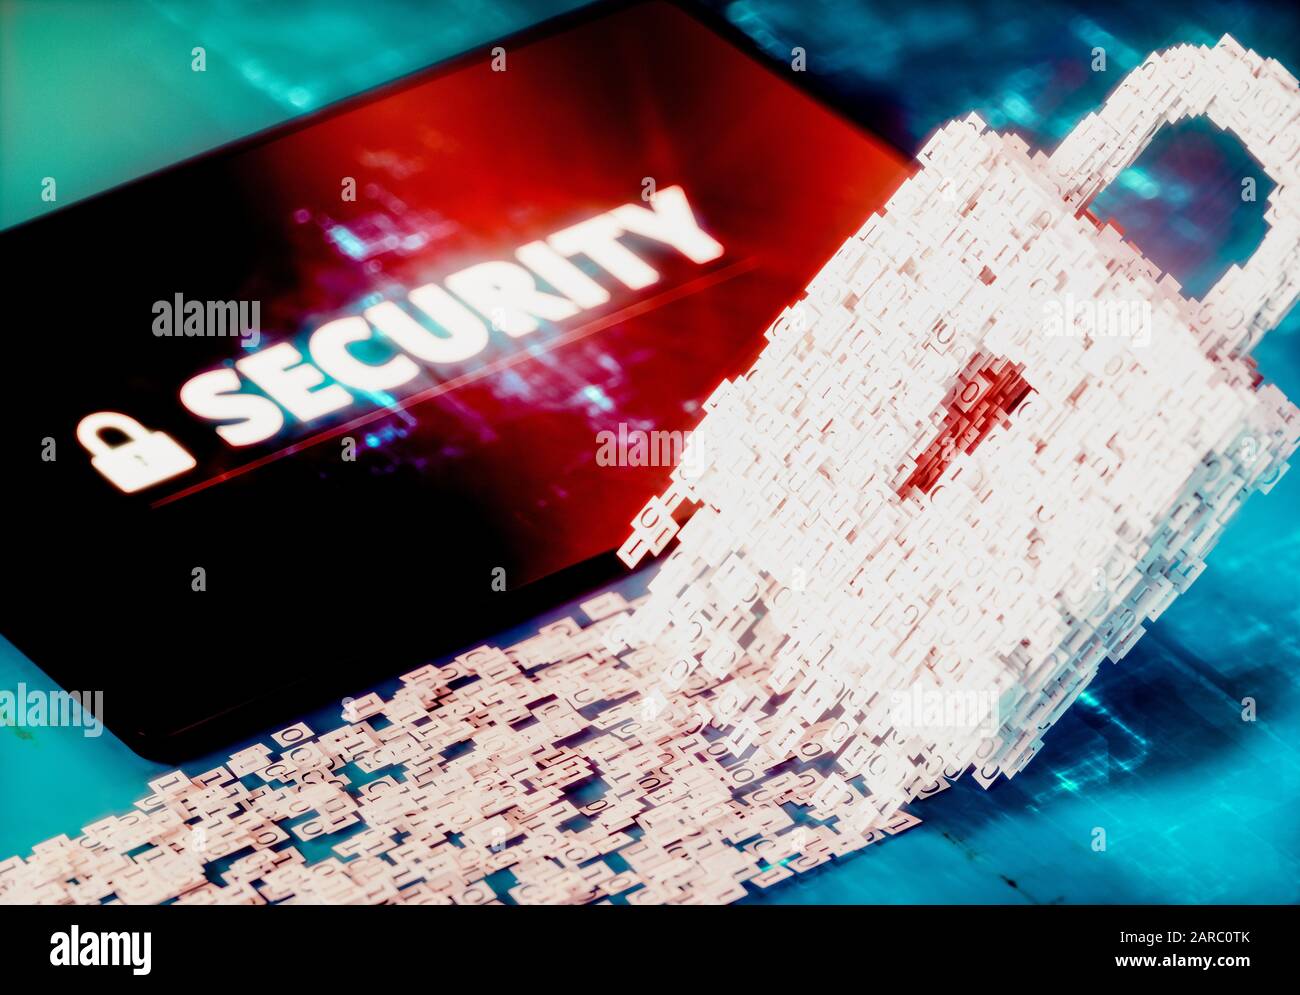 Cyberspace security concept. 3d computer generated image. Stock Photo